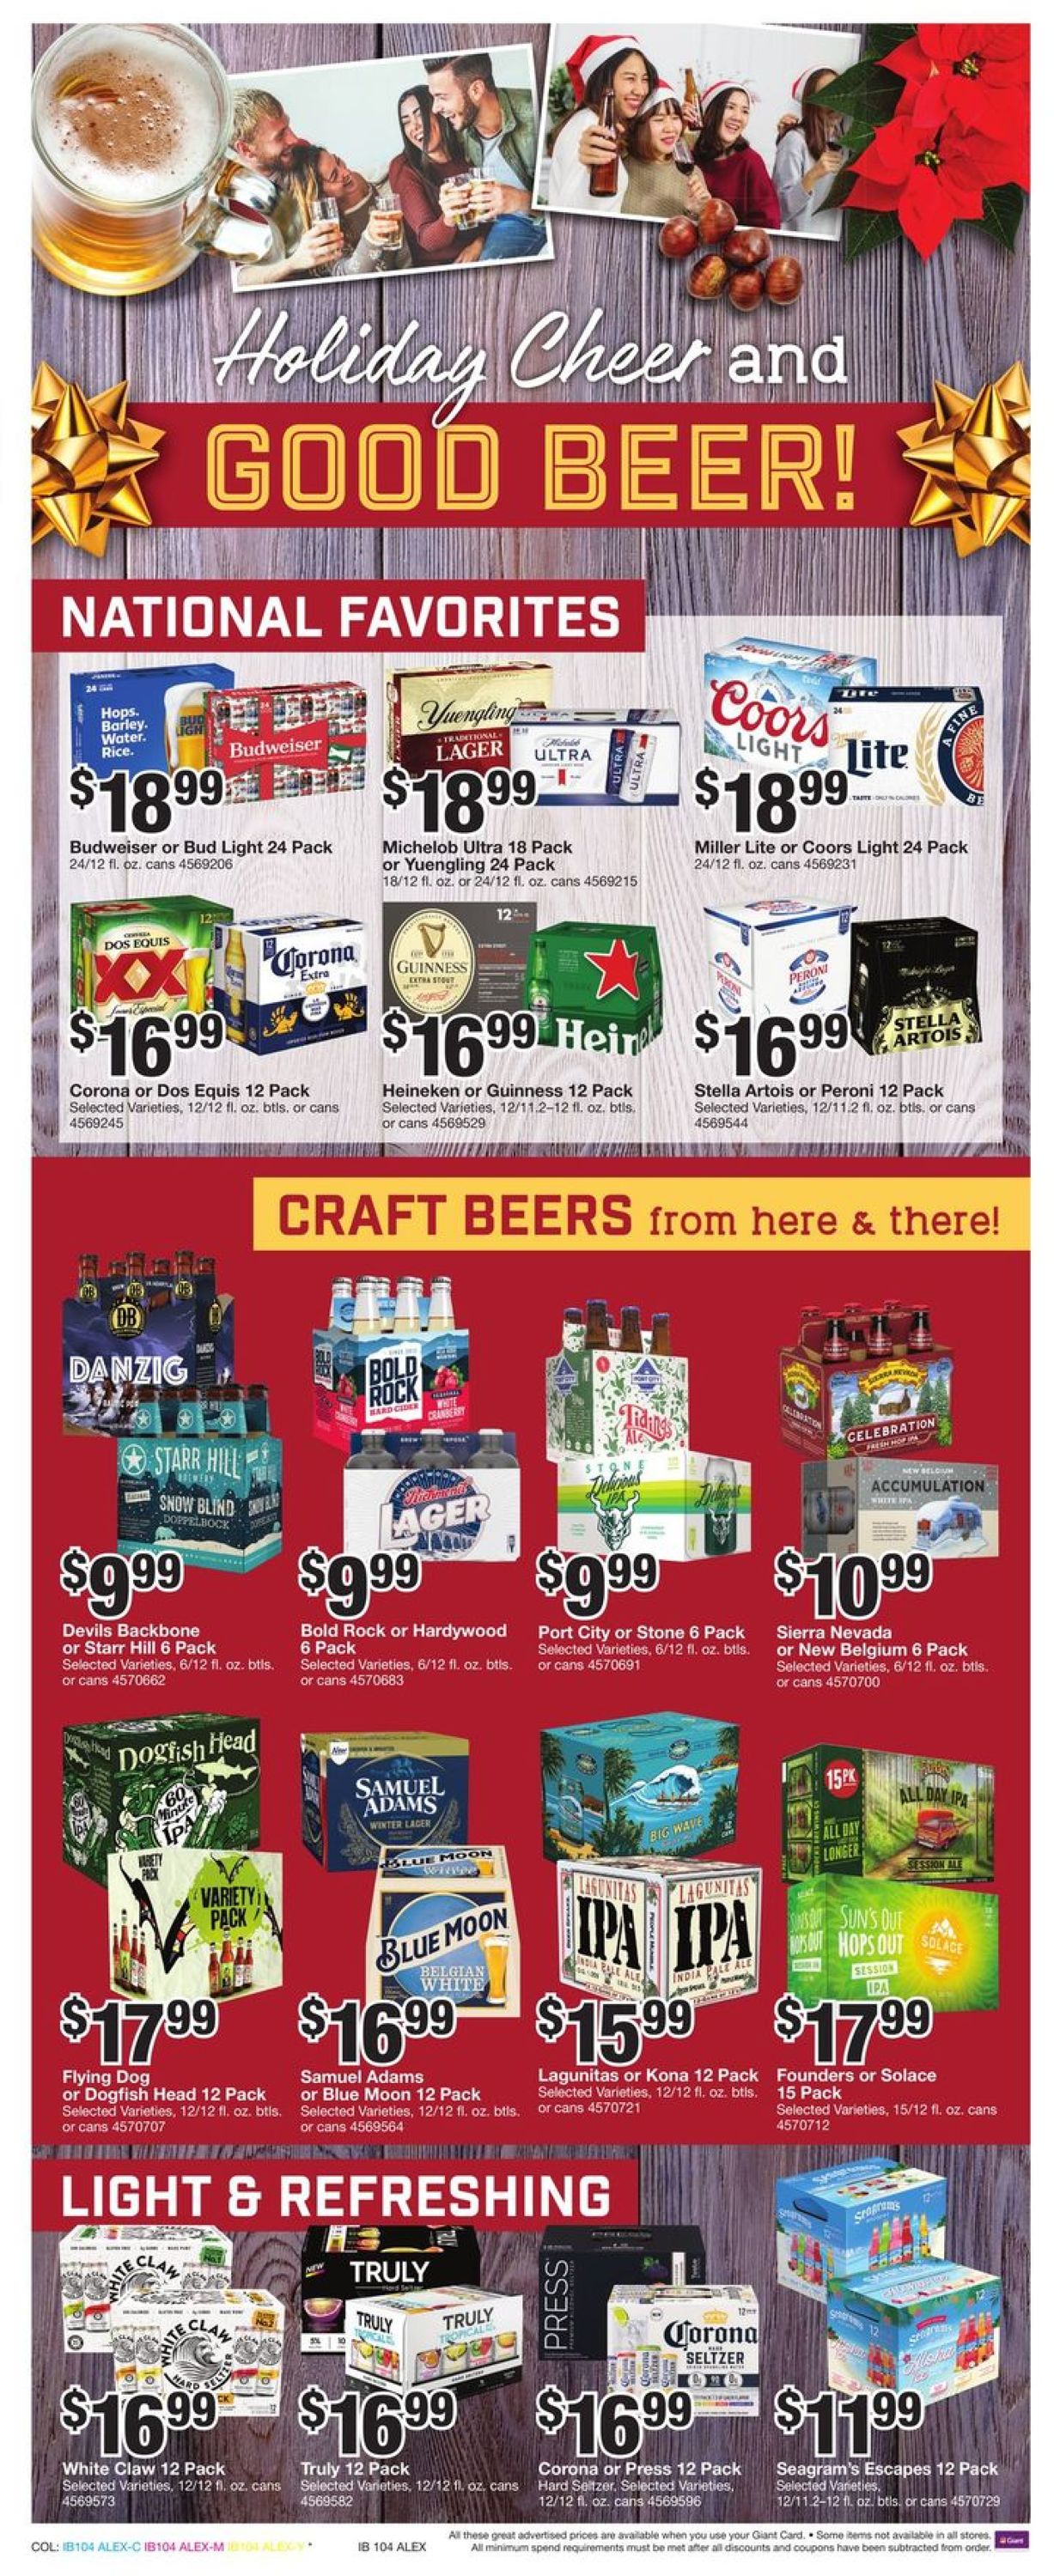 Giant Food Thanksgiving 2020 Weekly Ad Circular - valid 11/20-11/26/2020 (Page 16)